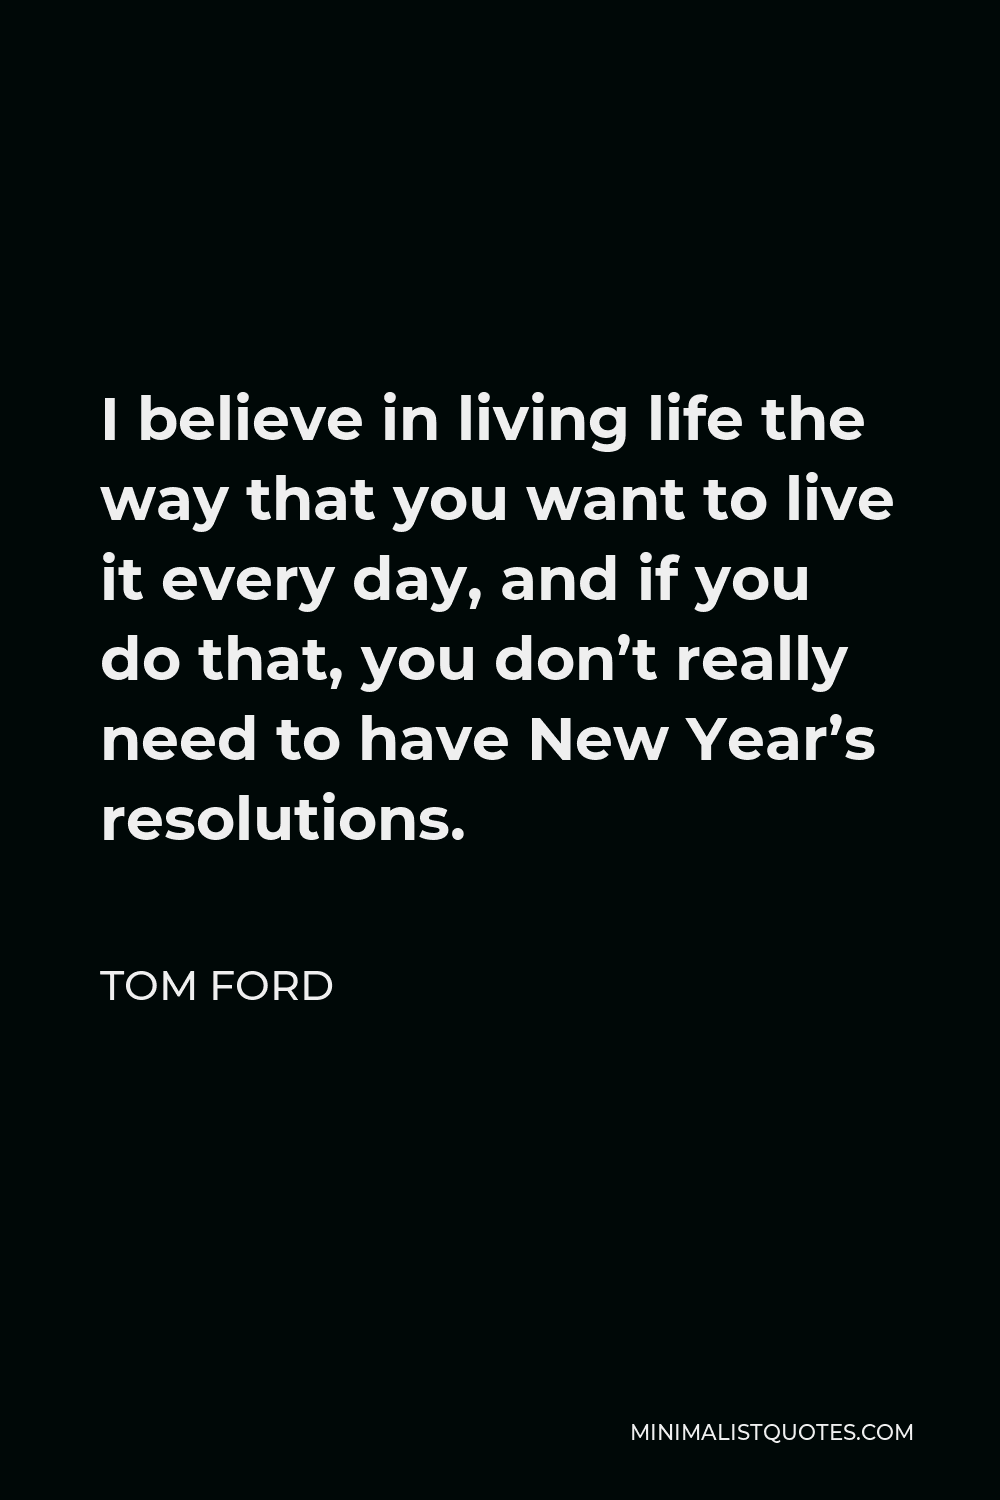 Tom Ford Quote: I believe in living life the way that you want to live it  every day, and if you do that, you don't really need to have New Year's  resolutions.